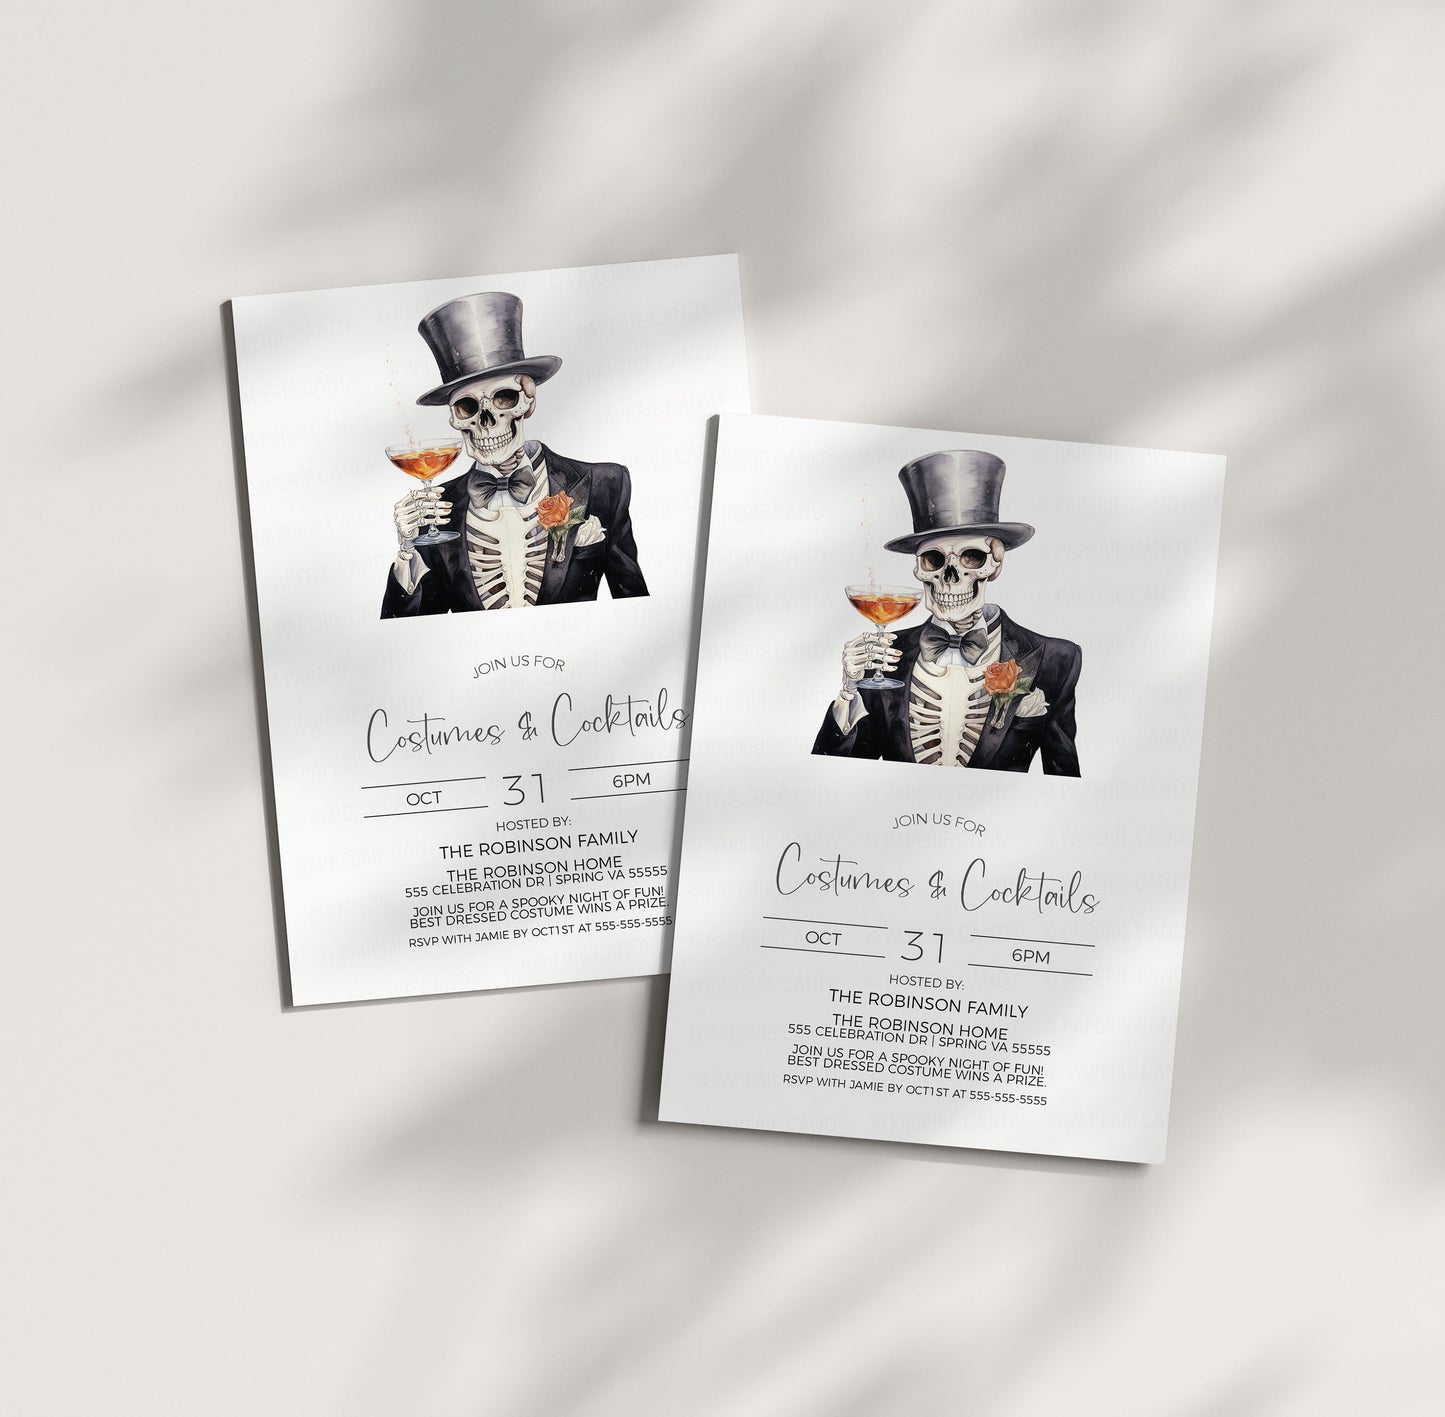 Halloween Costumes & Cocktails Invitation, Costume Party Invite, Costume Contest Dinner, Happy Hour Adult Party, Editable Printable